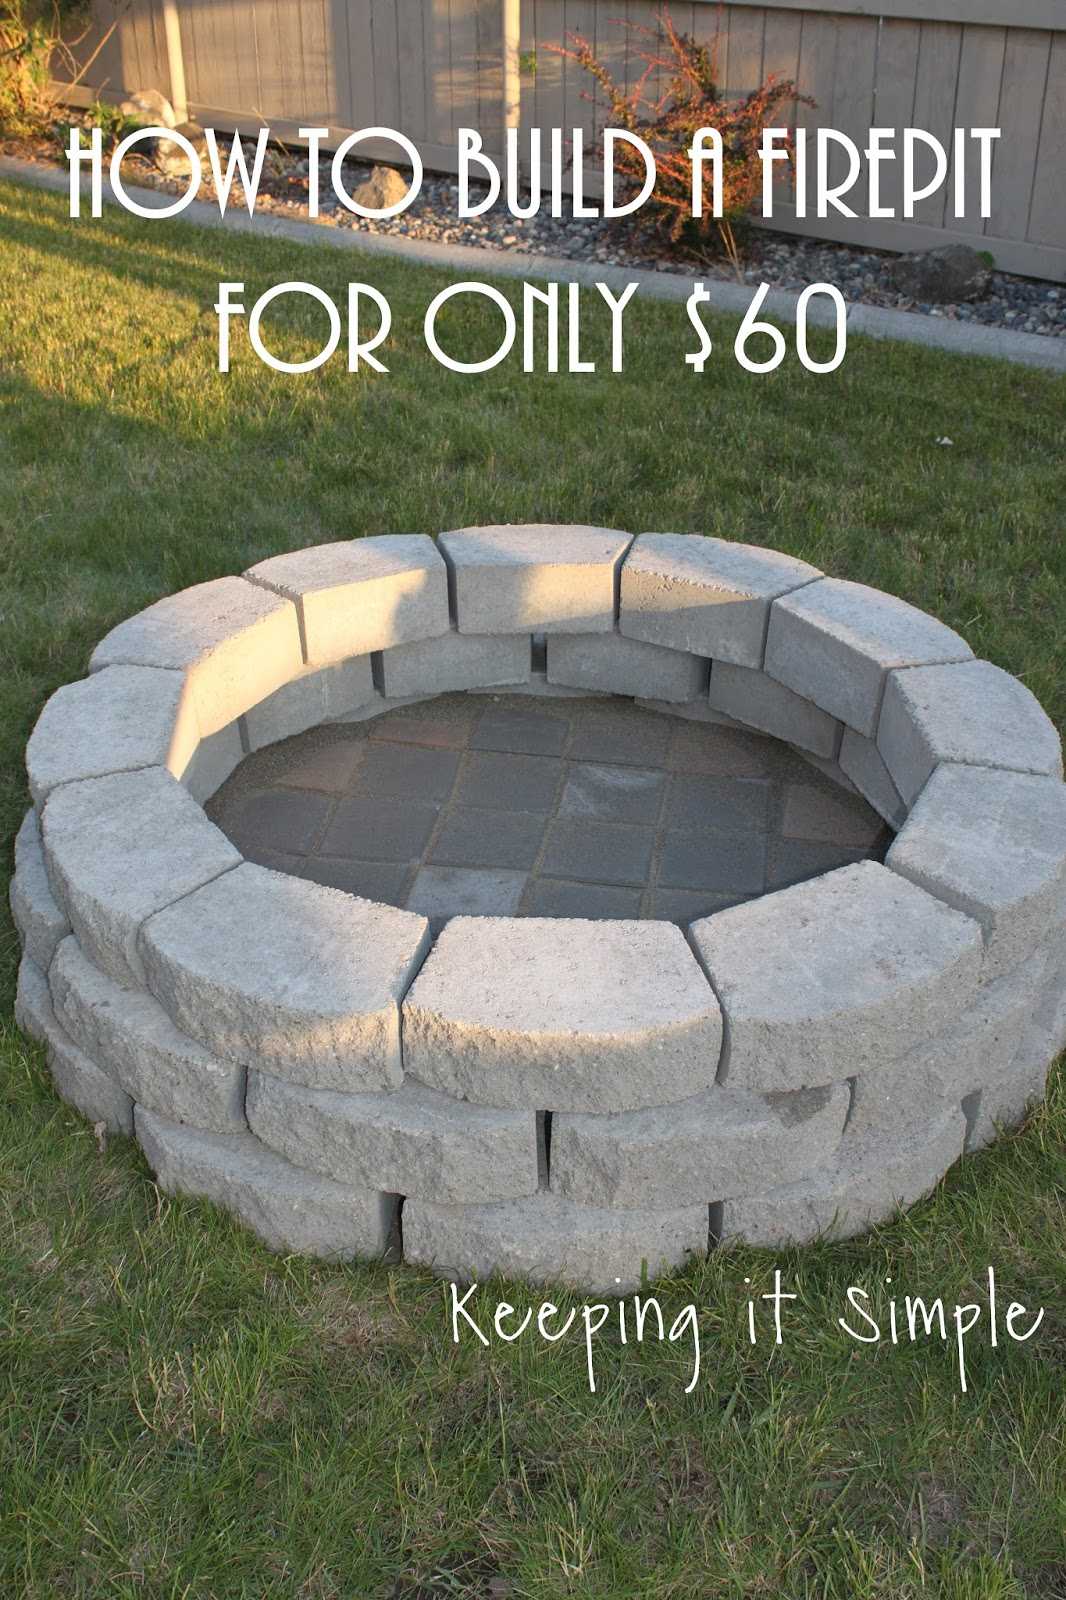 Everyone loves a beautiful but affordable DIY project and this fire pit made from grey pavers is incredible! Via Keeping It Simple Crafts